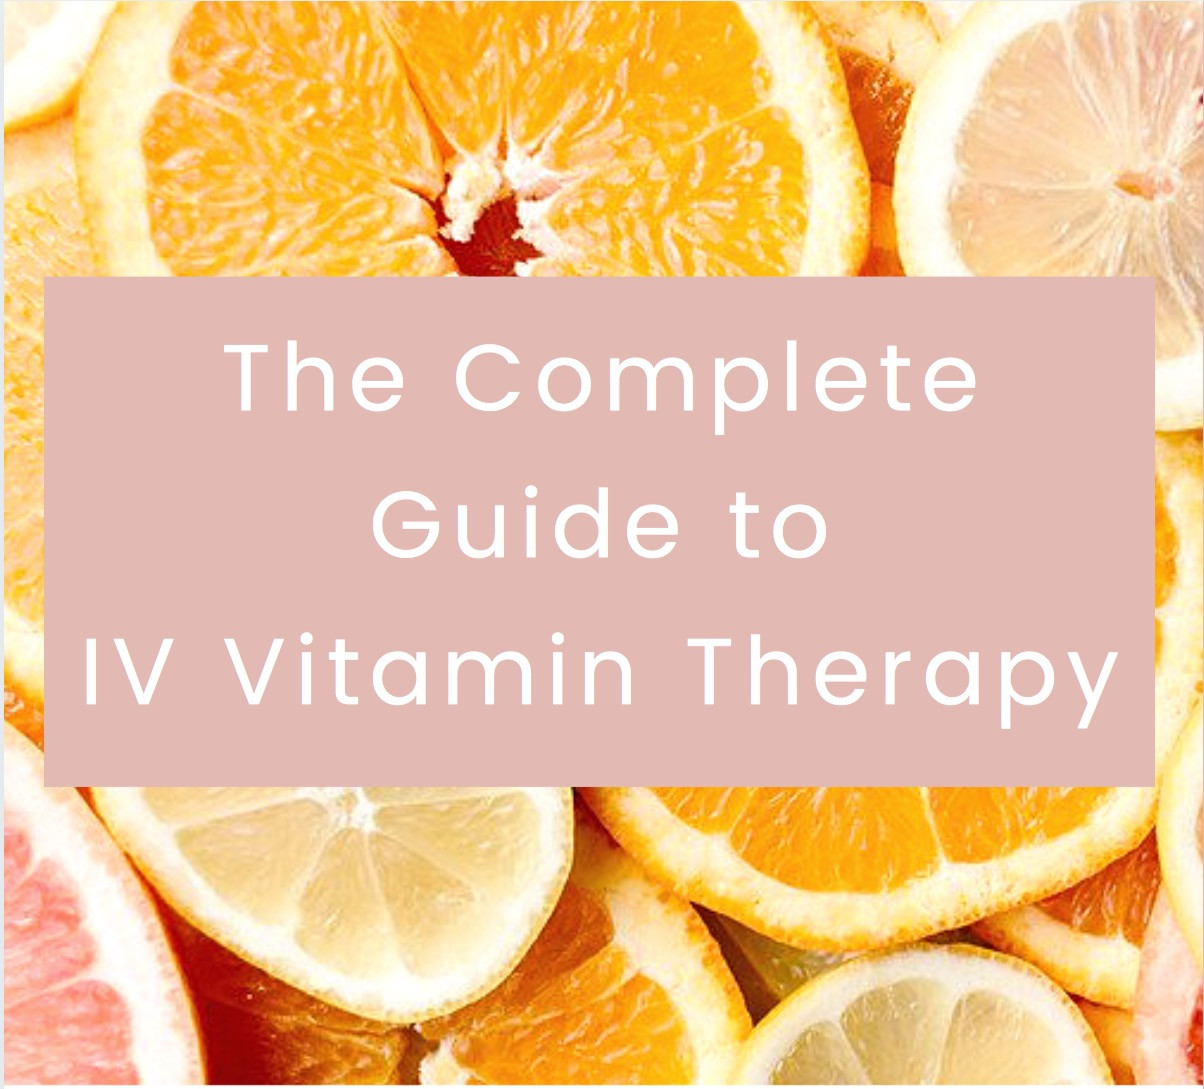 The Complete Guide To IV Vitamin Therapy